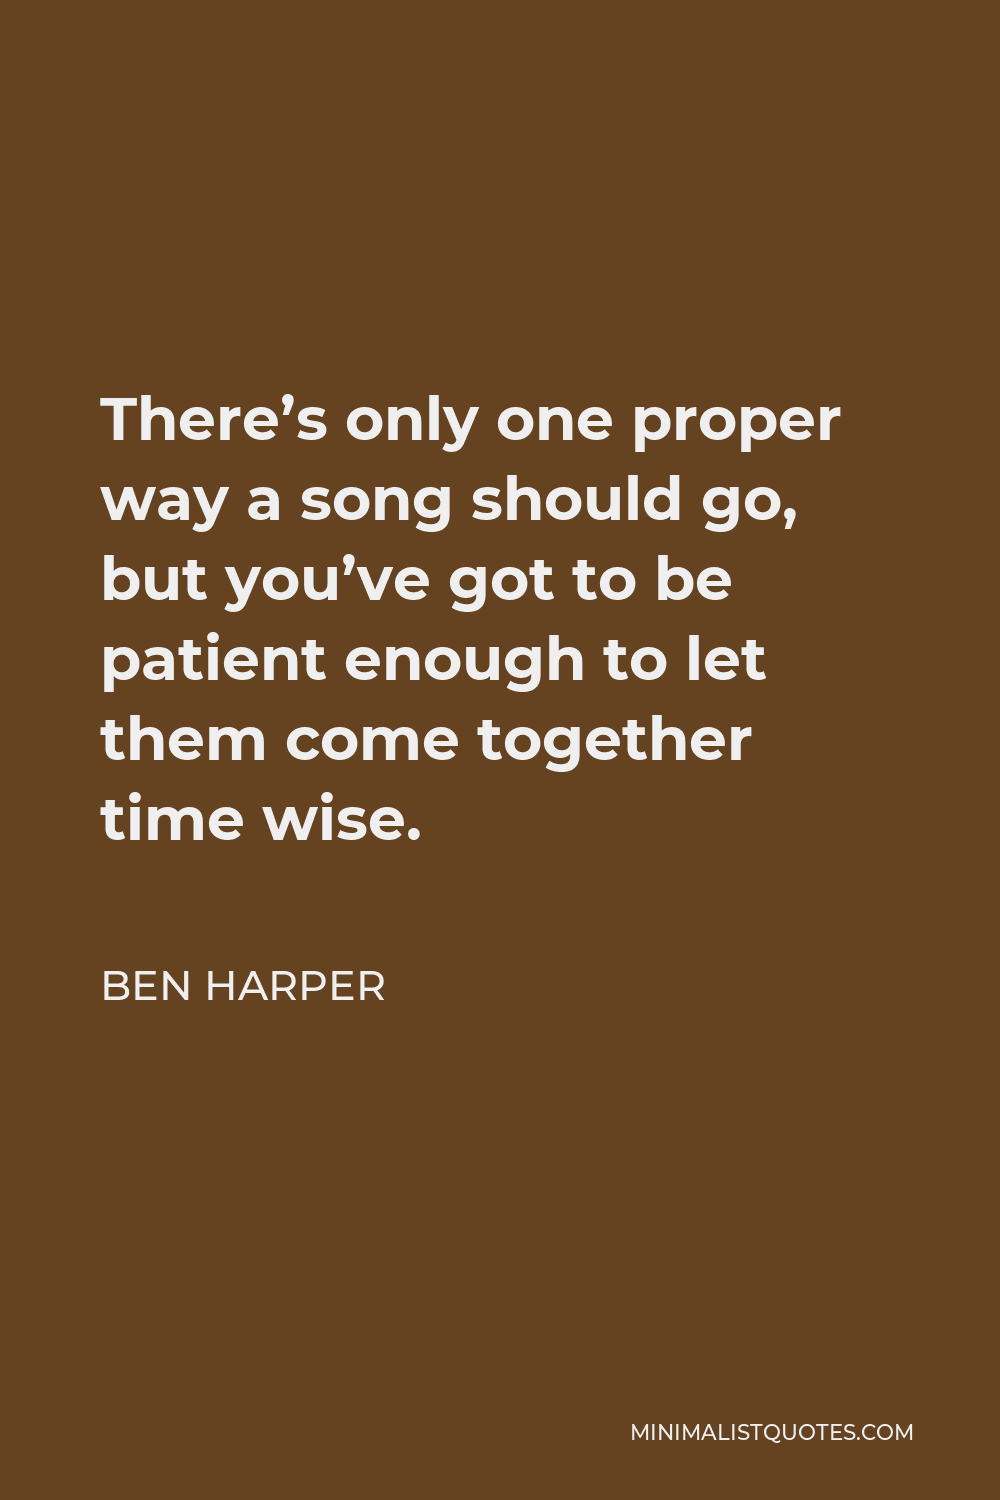 Ben Harper Quote - There’s only one proper way a song should go, but you’ve got to be patient enough to let them come together time wise.